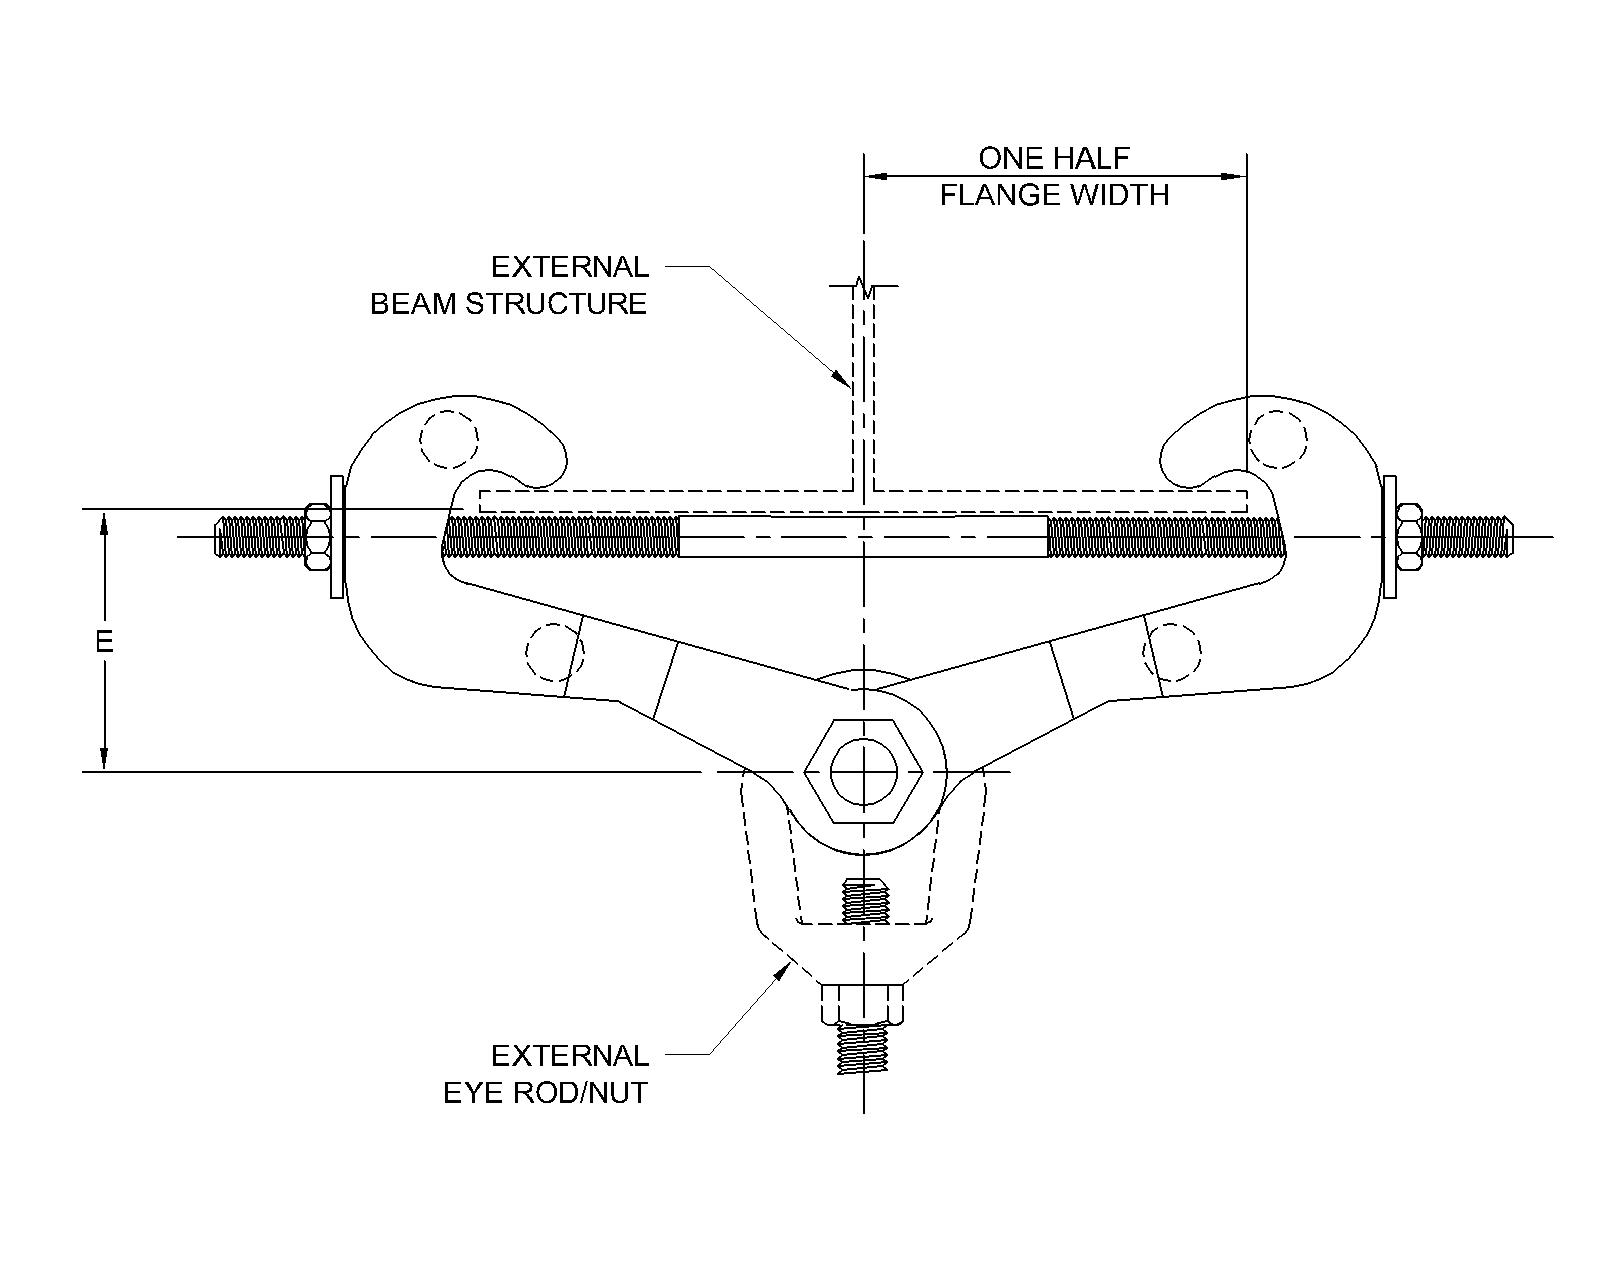 Fig. 135: Malleable Beam Clamp